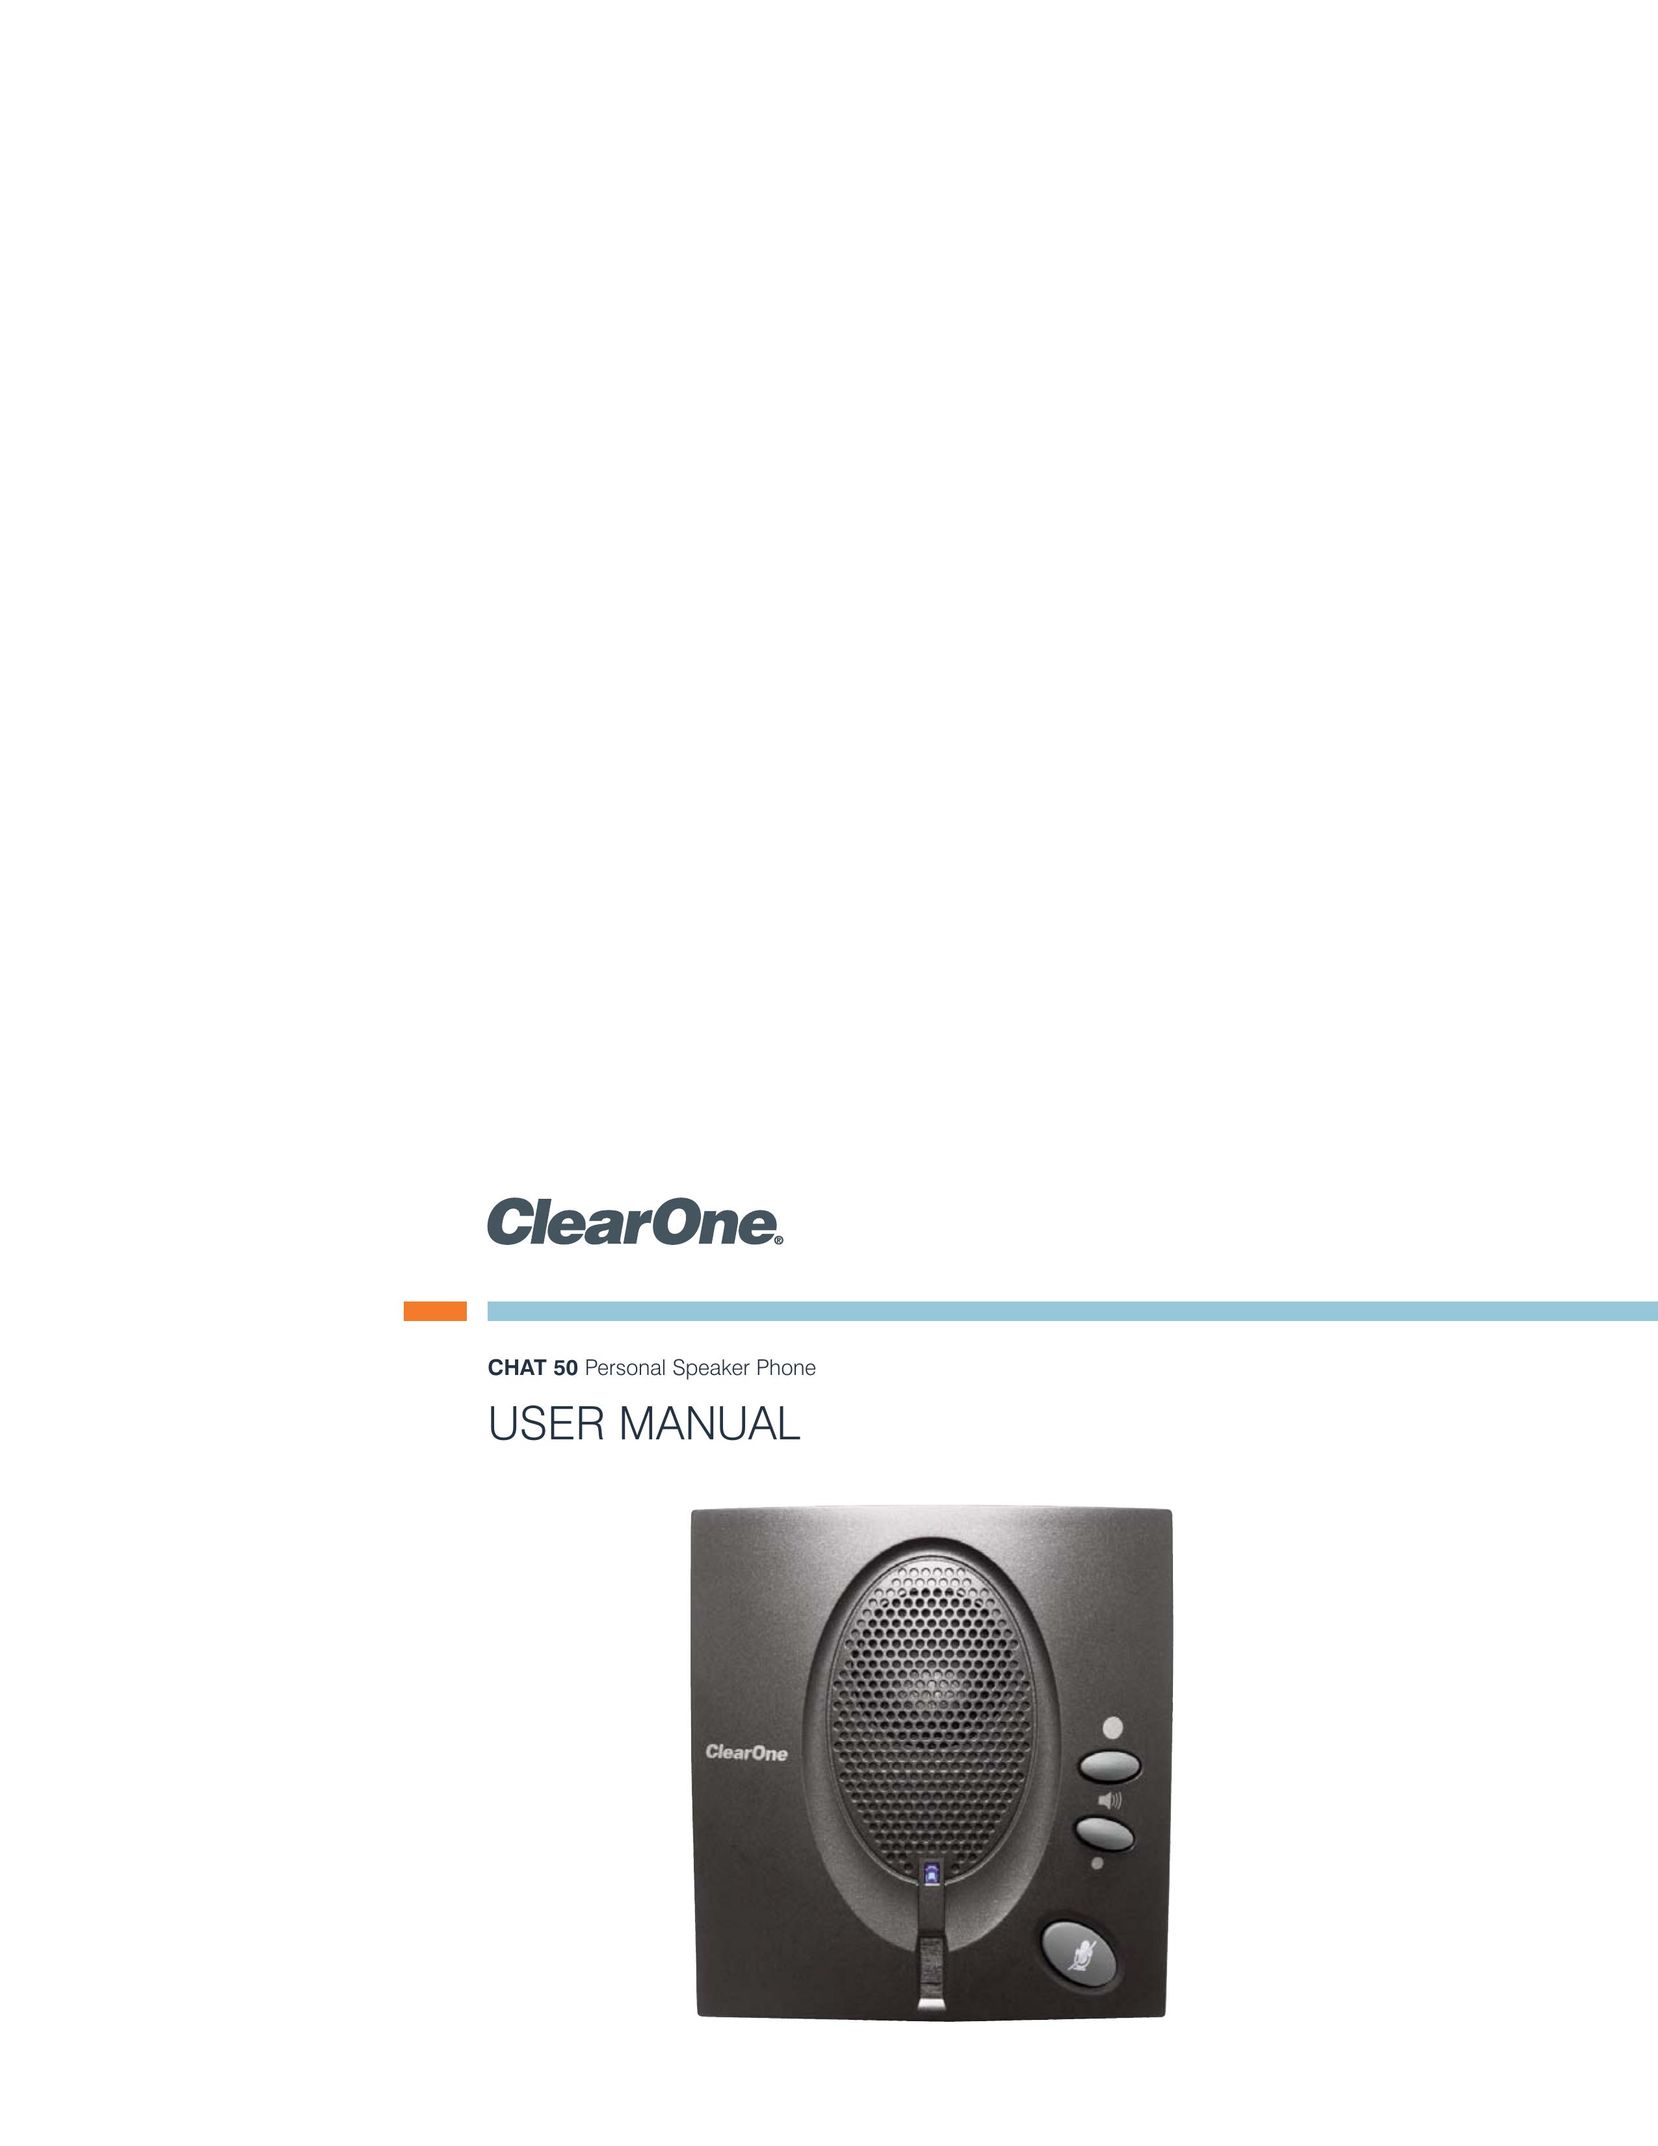 ClearOne comm 50 Conference Phone User Manual